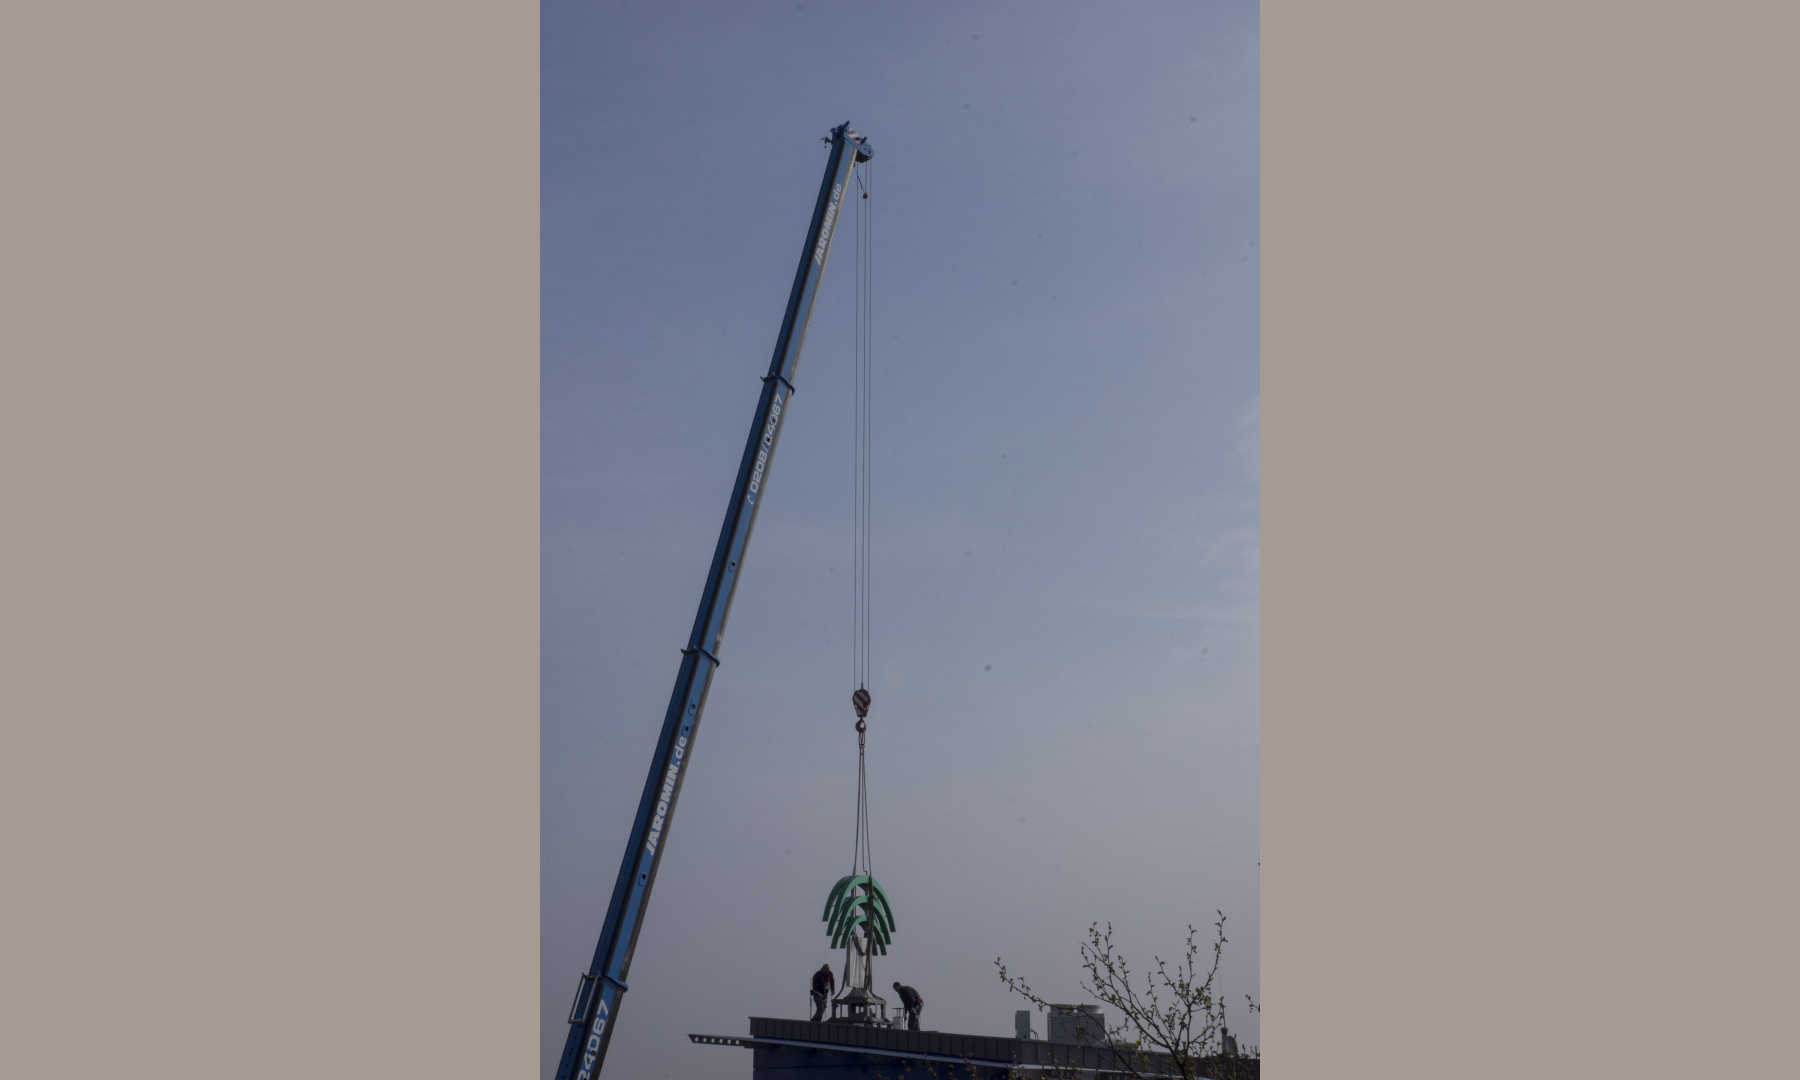 A crane taking down the N-symbol from the former Norris bank in Essen